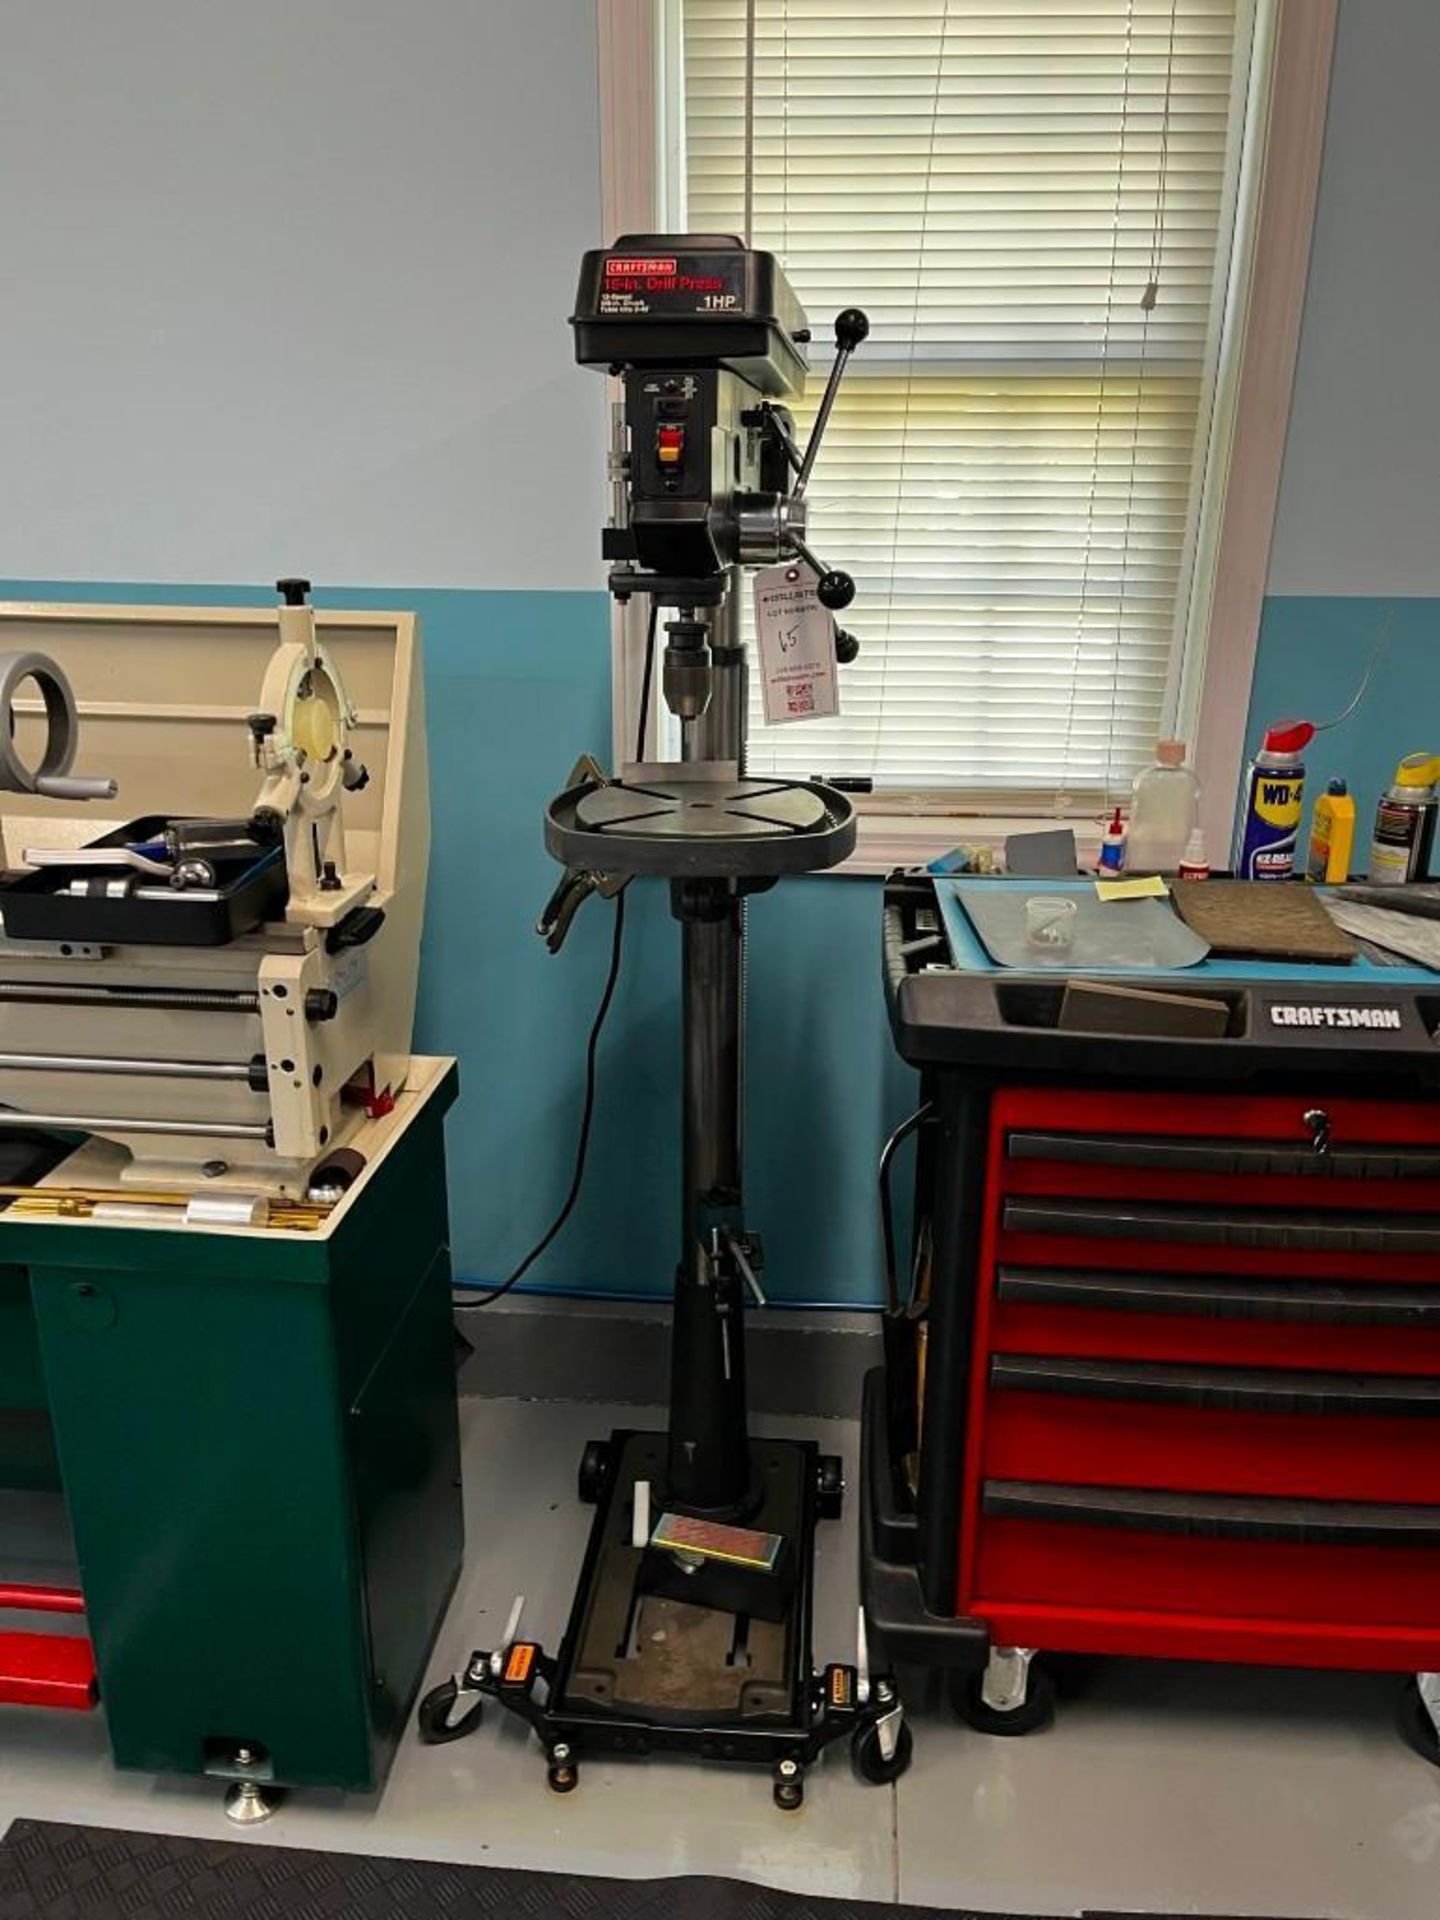 Crafstman 15" Drill Press with Stand - Image 6 of 8